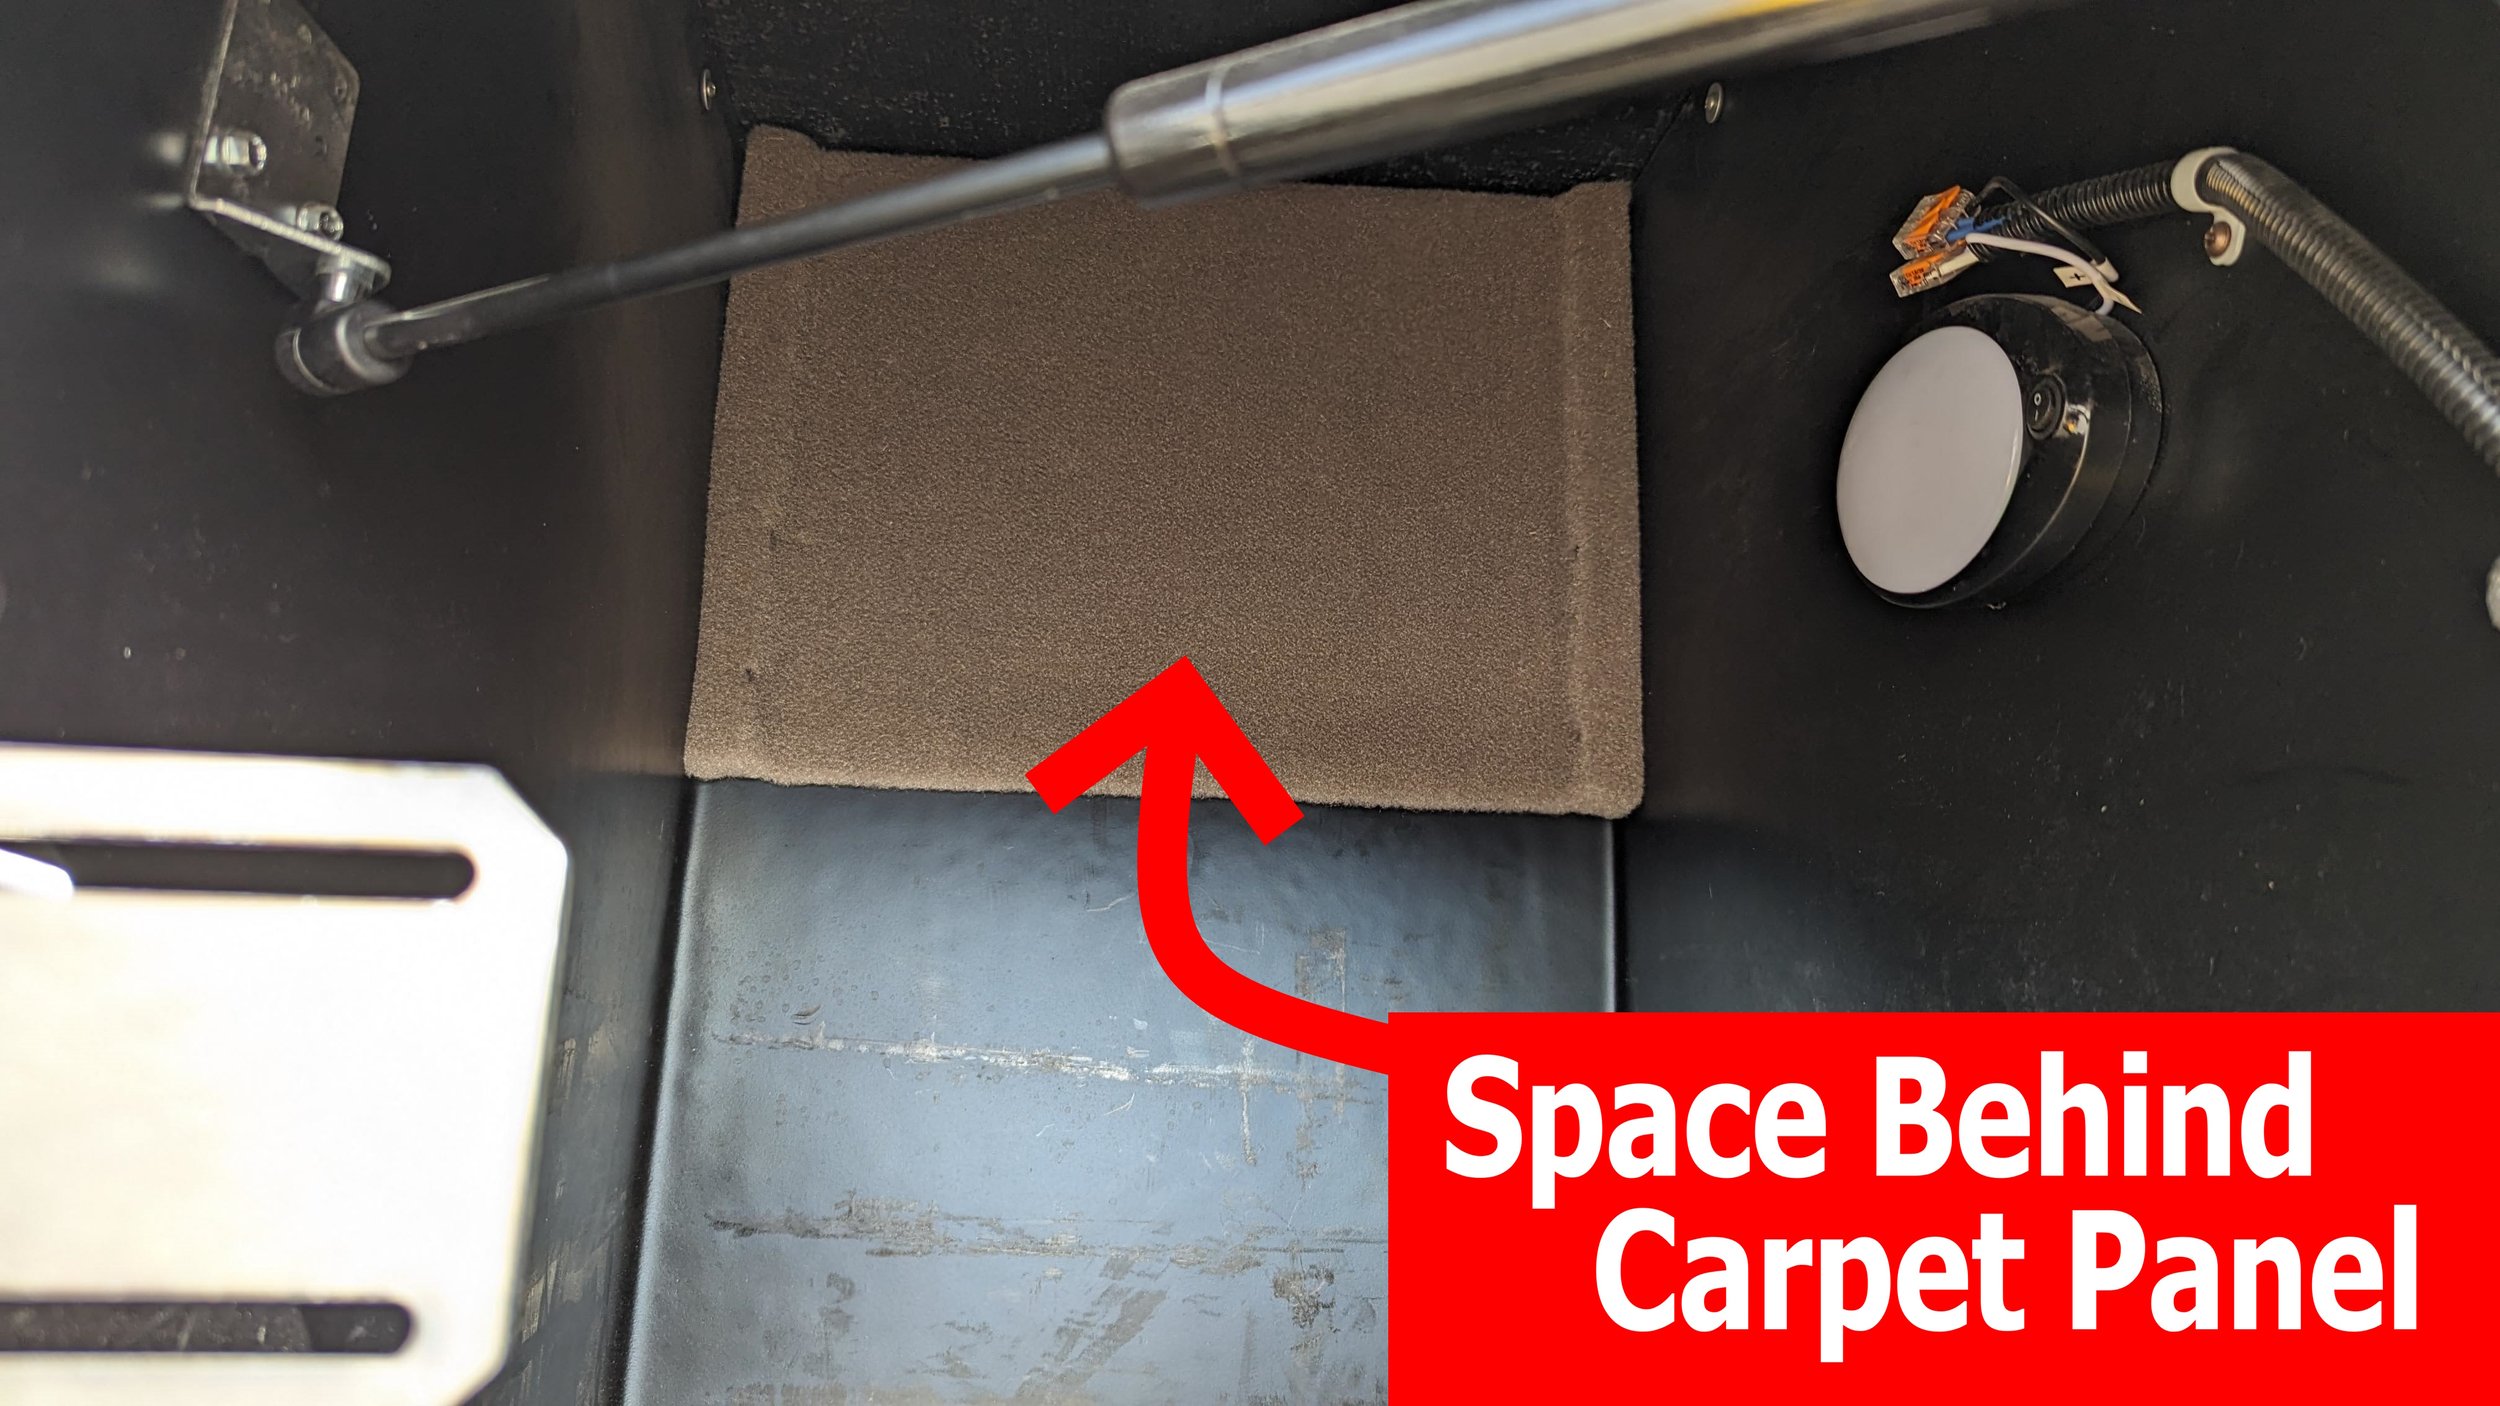 Extra storage space is behind this carpeted panel.